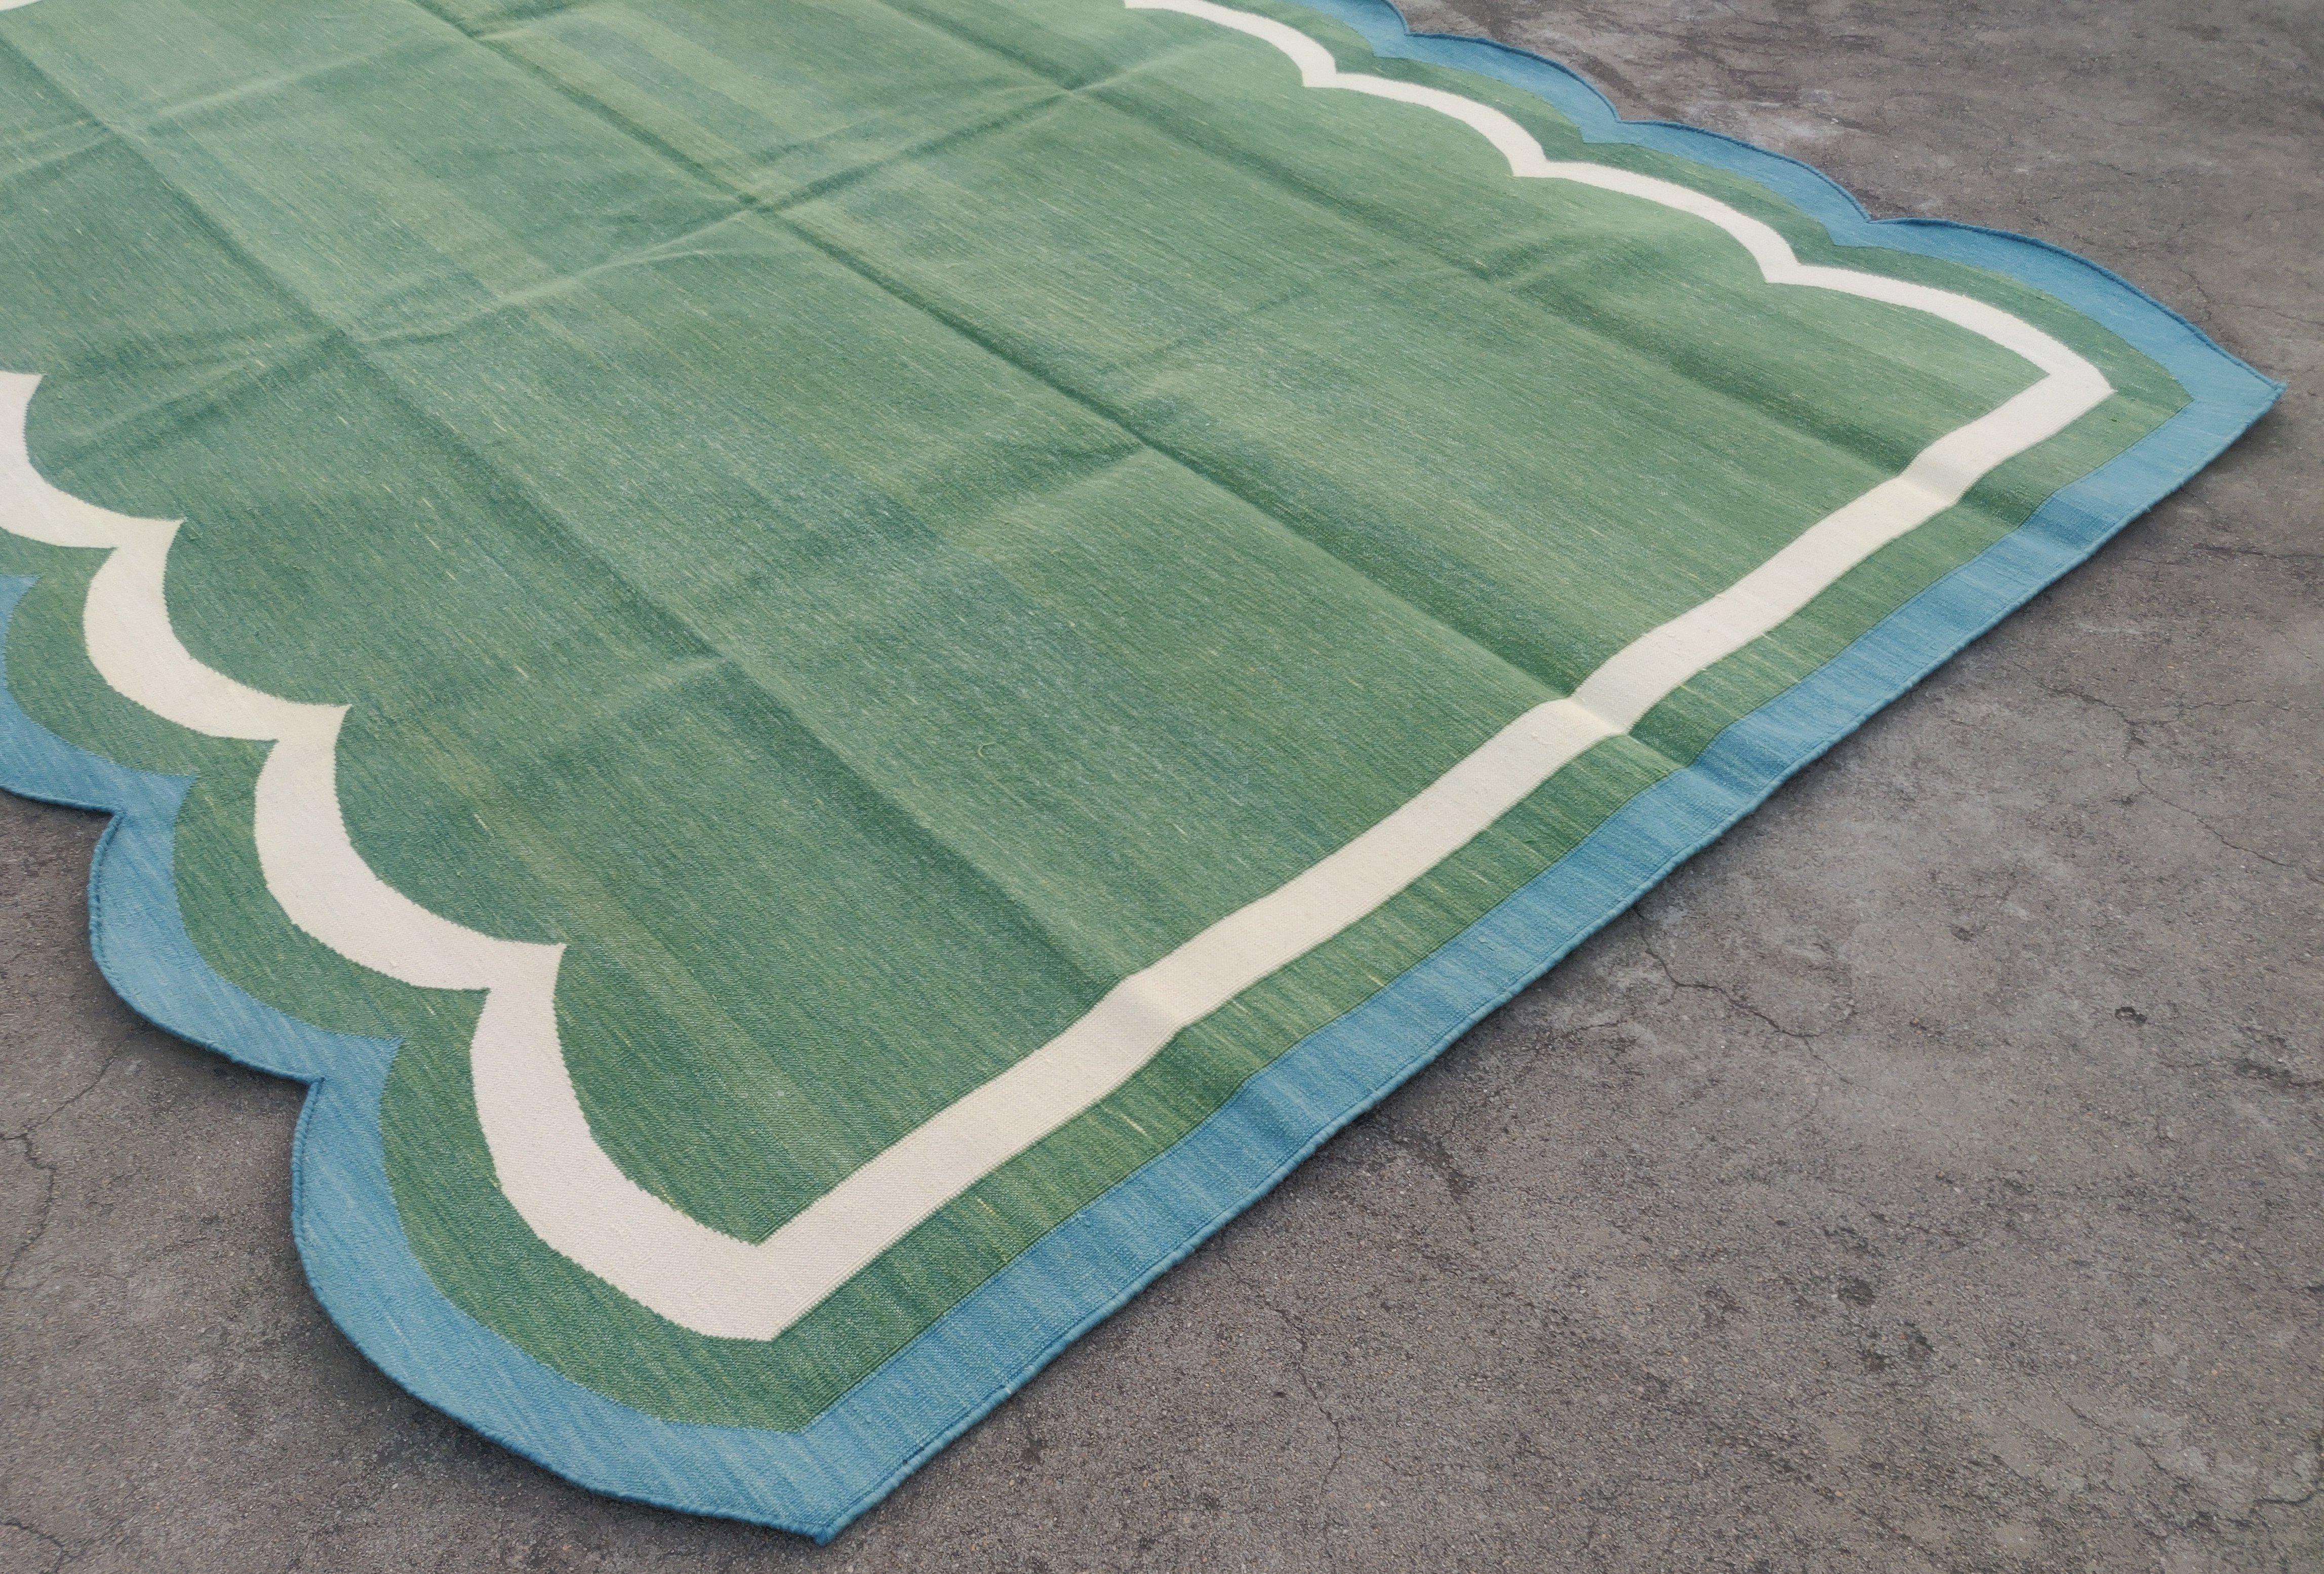 Hand-Woven Handmade Cotton Area Flat Weave Rug, 5x7 Green And Blue Scallop Striped Dhurrie For Sale